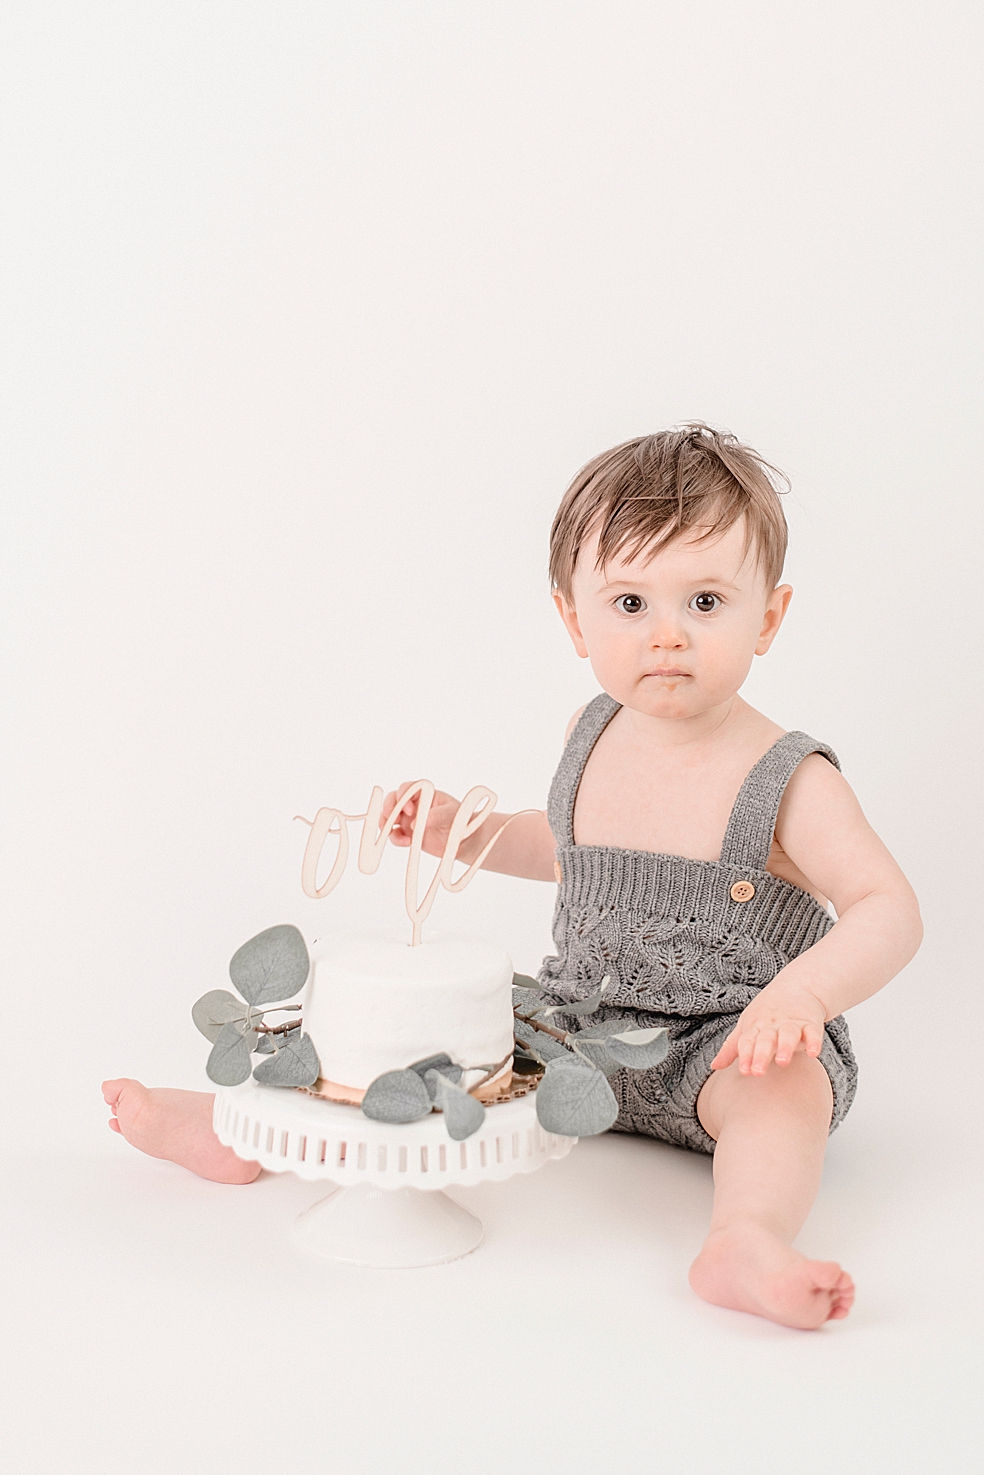 Baby boy sitting by smash cake in grab overalls | Photo by Jessica Lee Photography